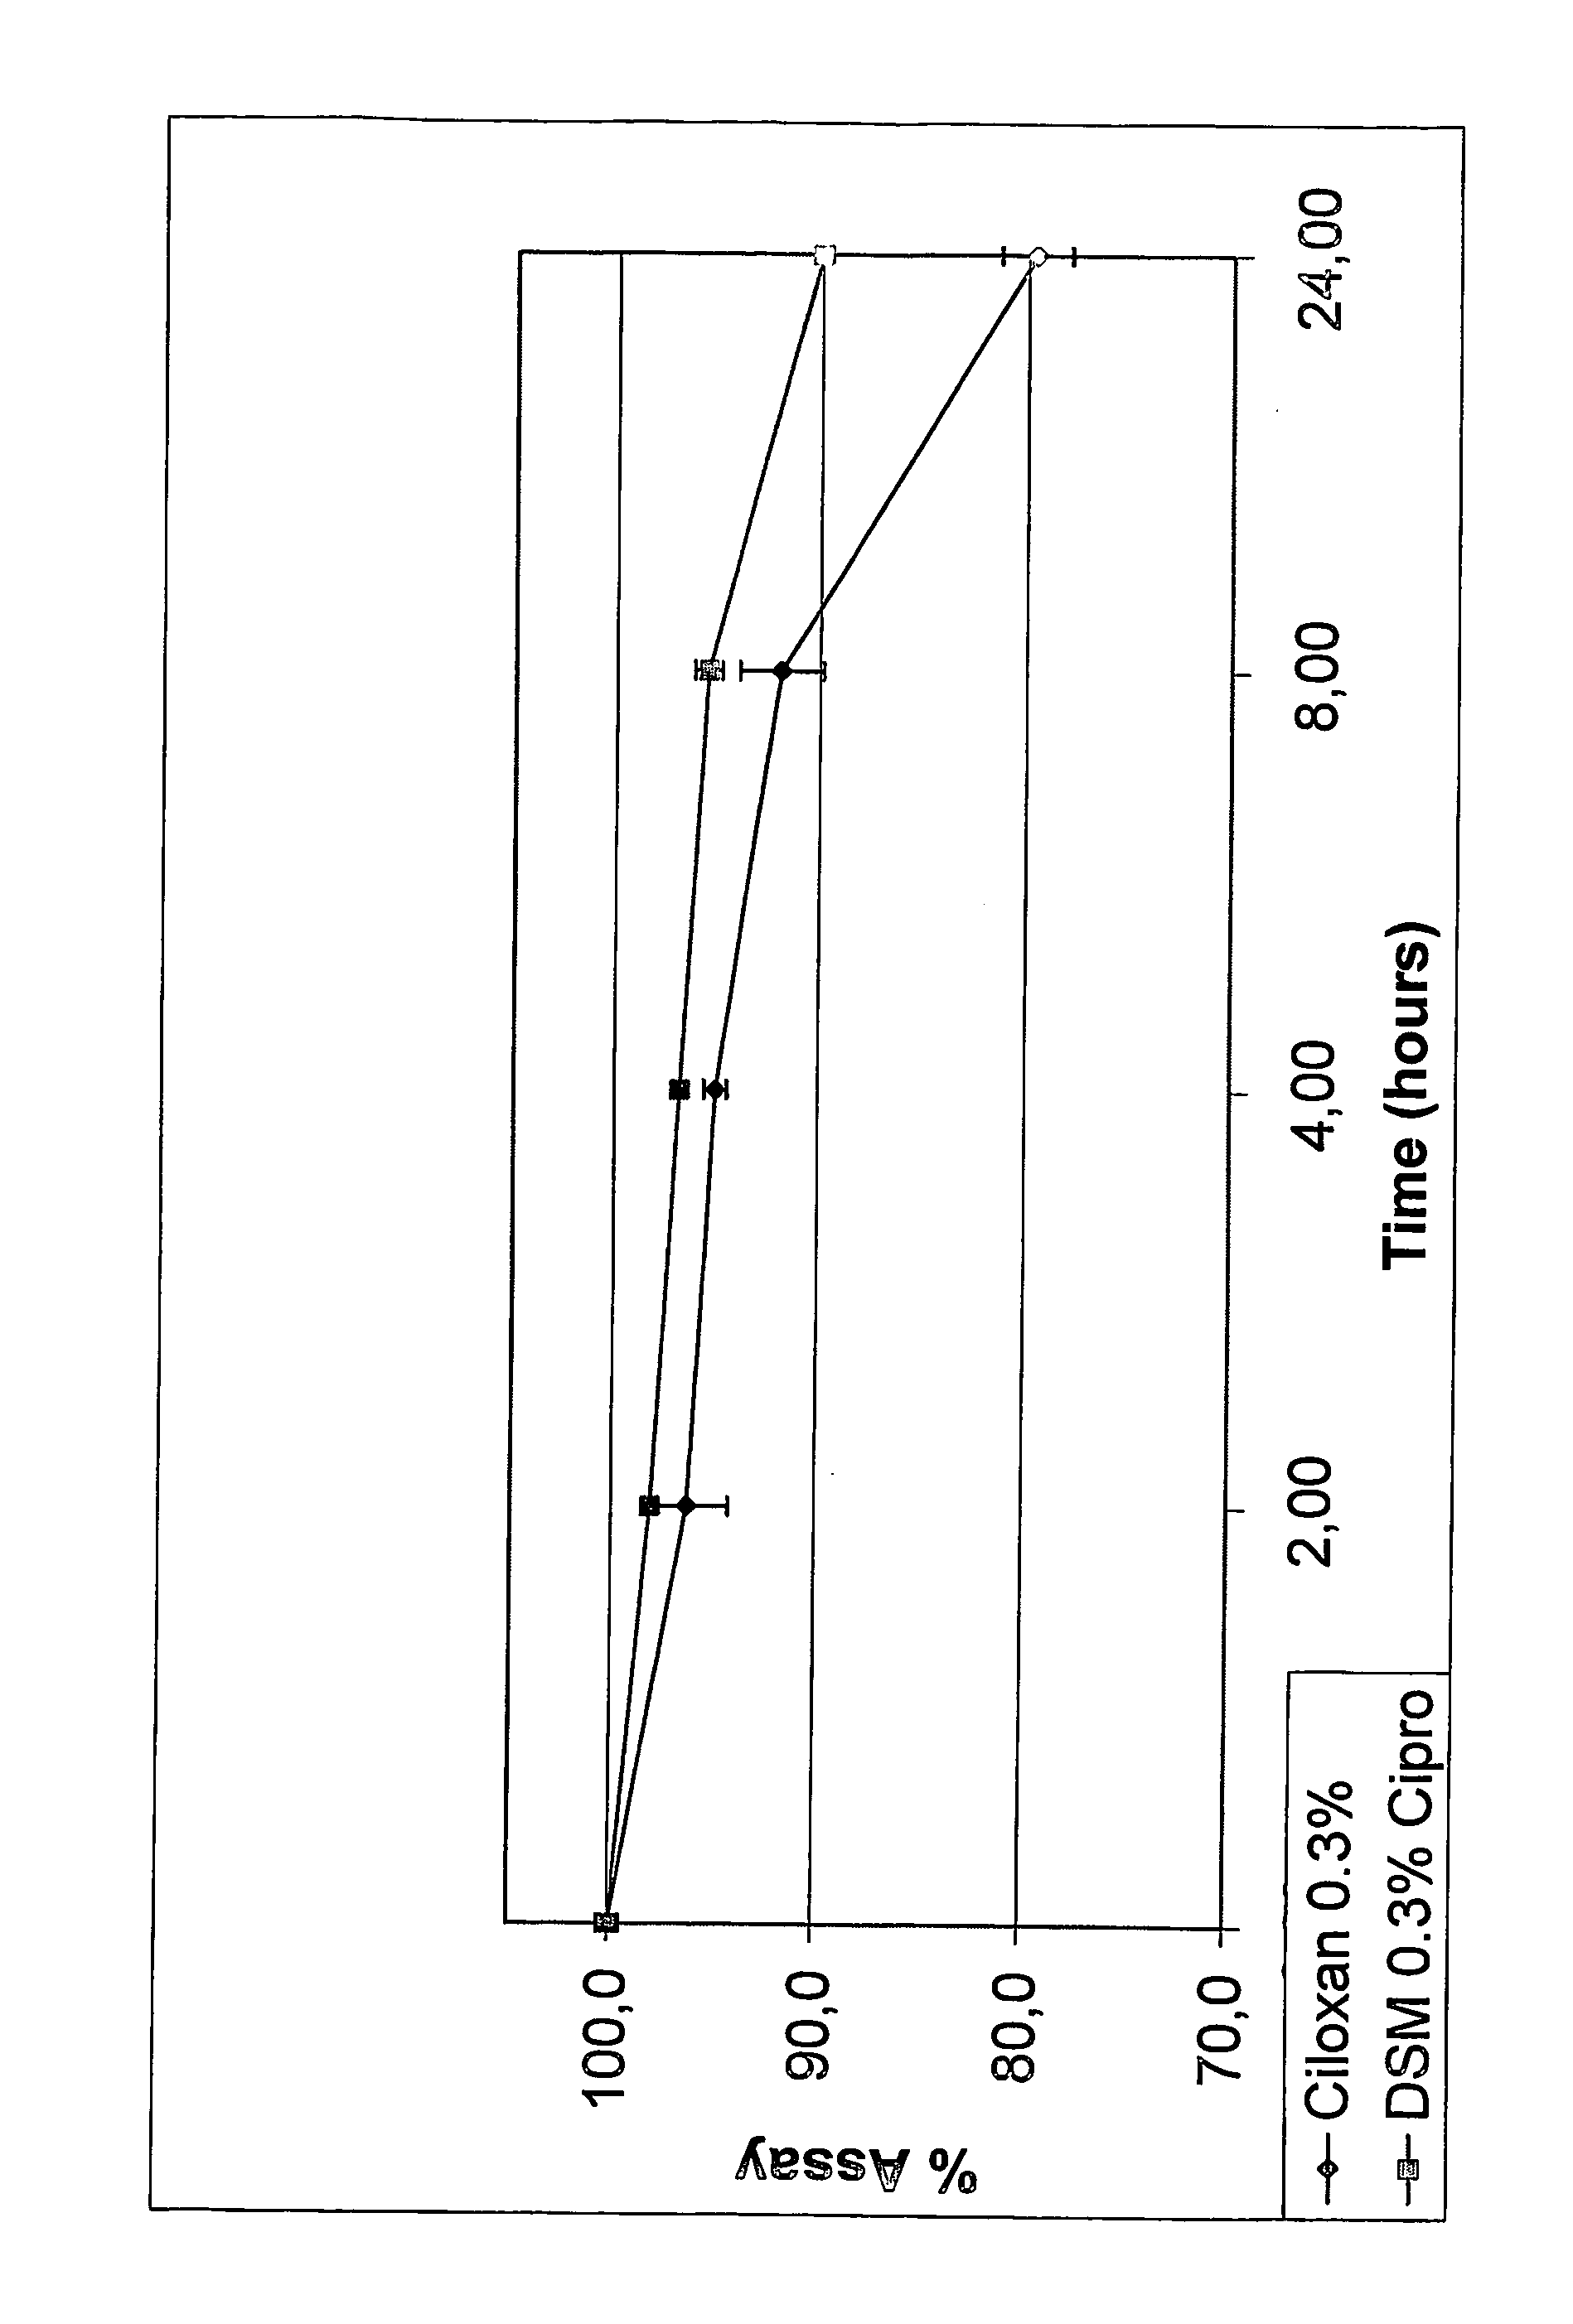 Fluoroquinolone formulations and methods of making and using the same